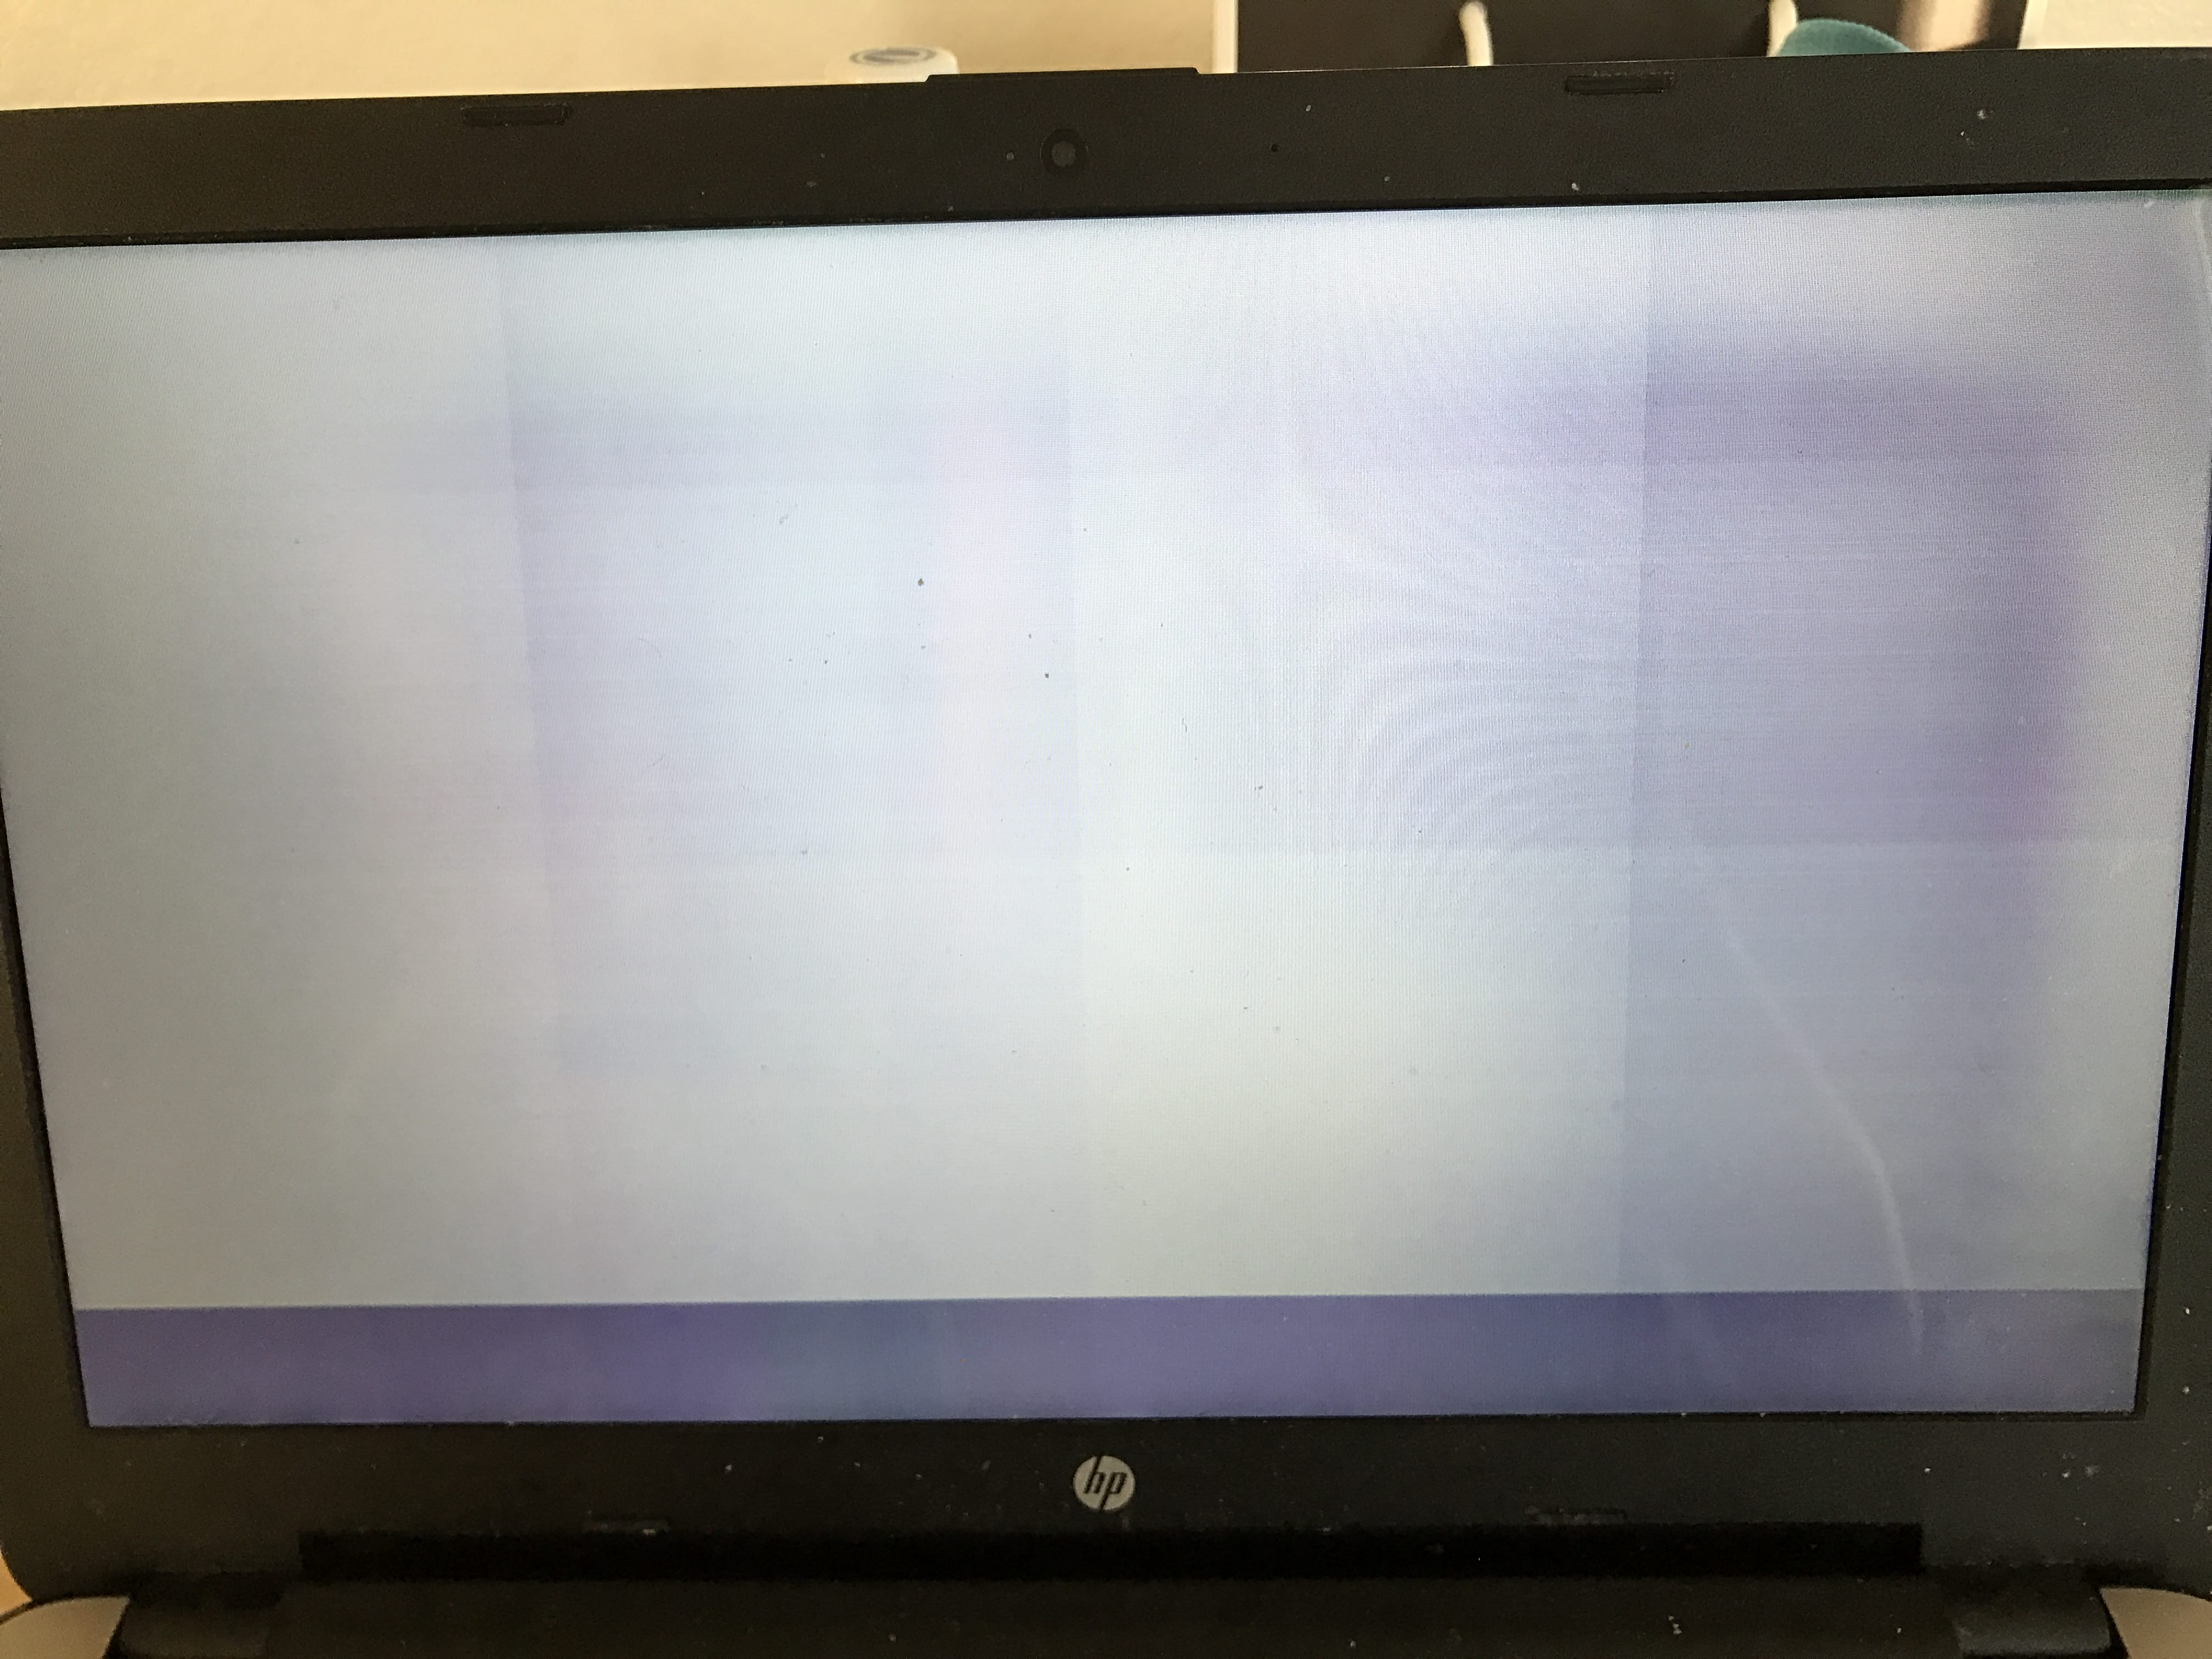 Glitchy grey screen upon start up + screen freezing - HP Support Community  - 6923896